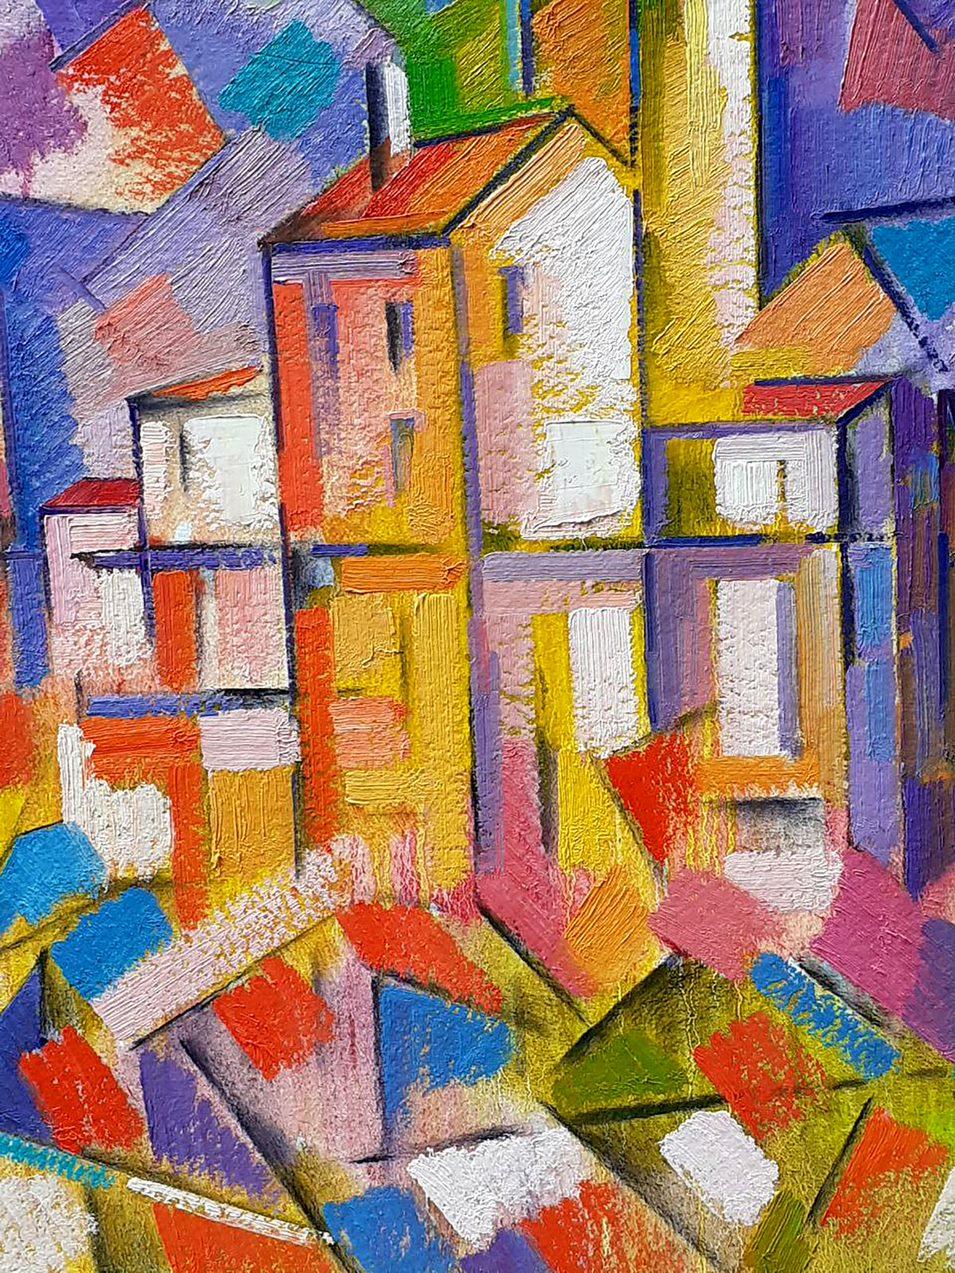 Artist: Peter Tovpev
Work: Original oil painting, handmade artwork, one of a kind 
Medium: Oil on Canvas 
Year: 2002
Style: Cubism
Title: City
Size: 29.5